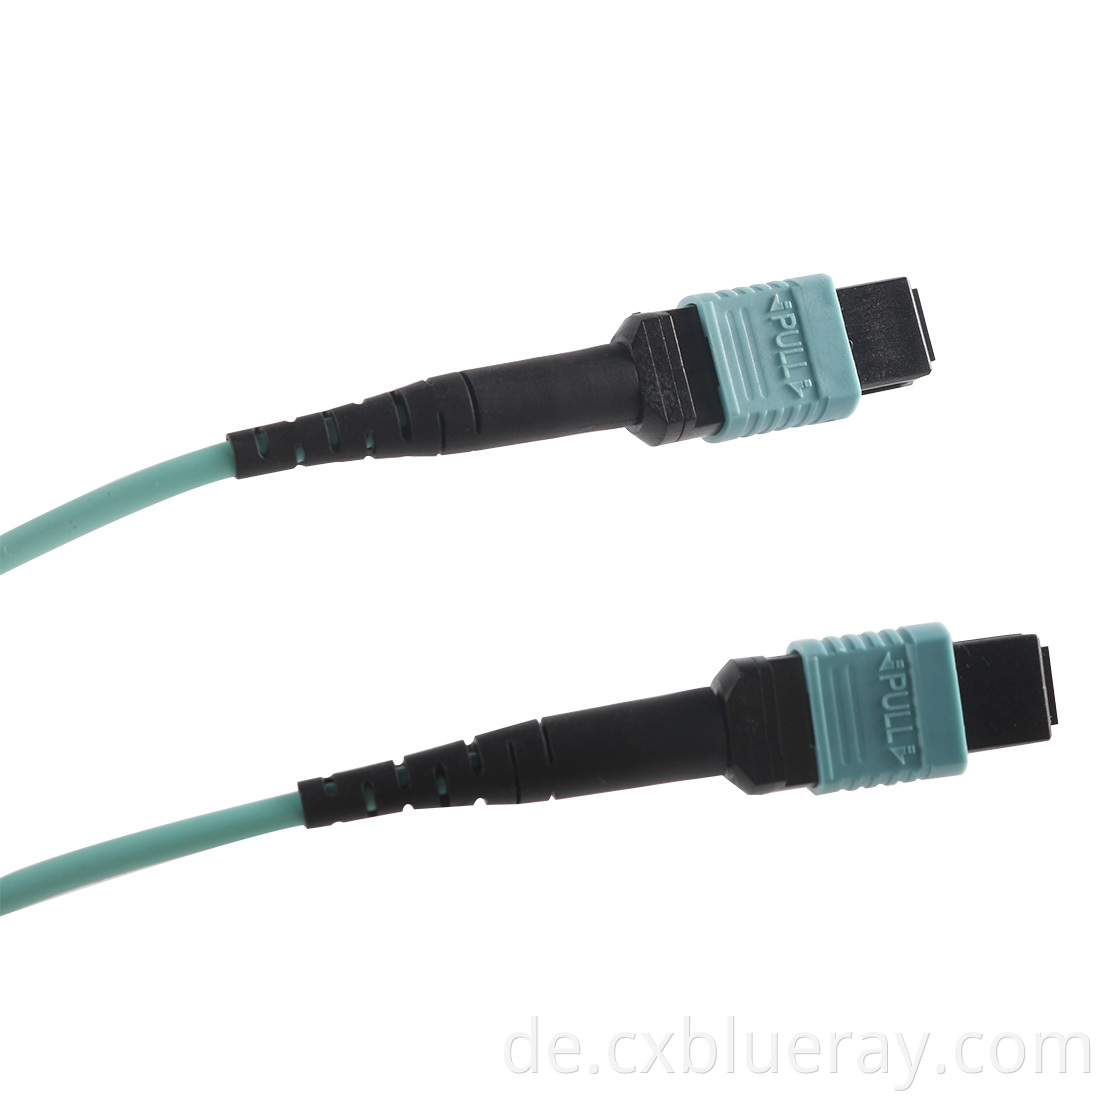 RJ11 PATCH CORD CABLE